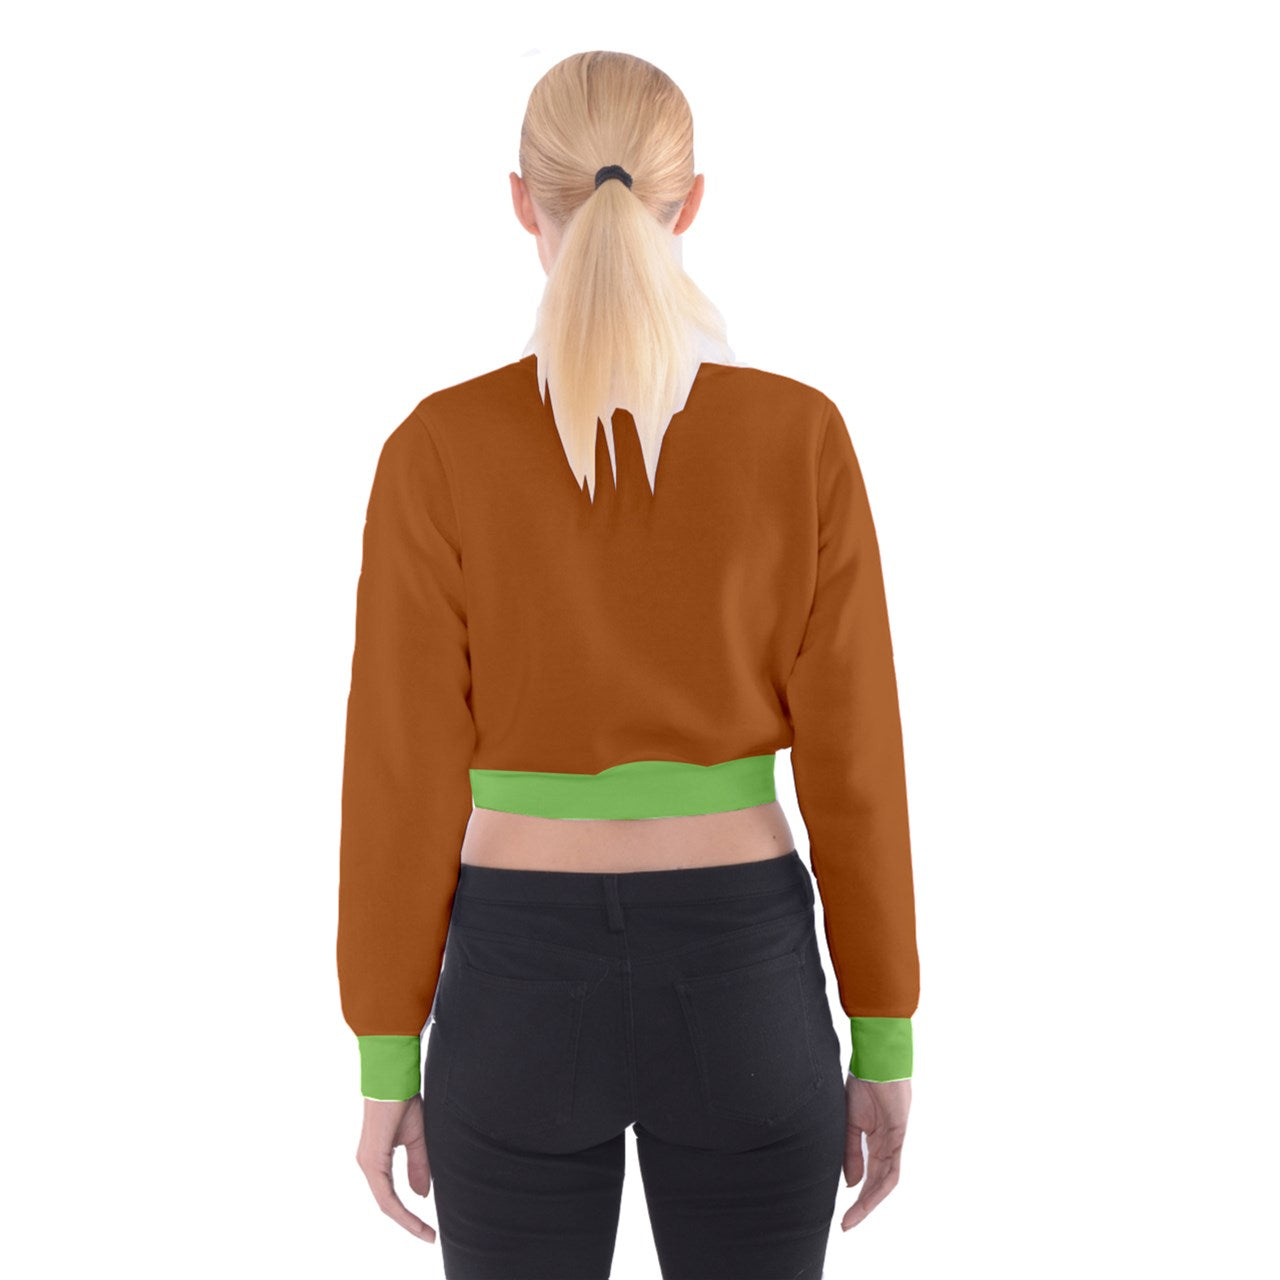 Stoney Balogna Sleuthing Crop top